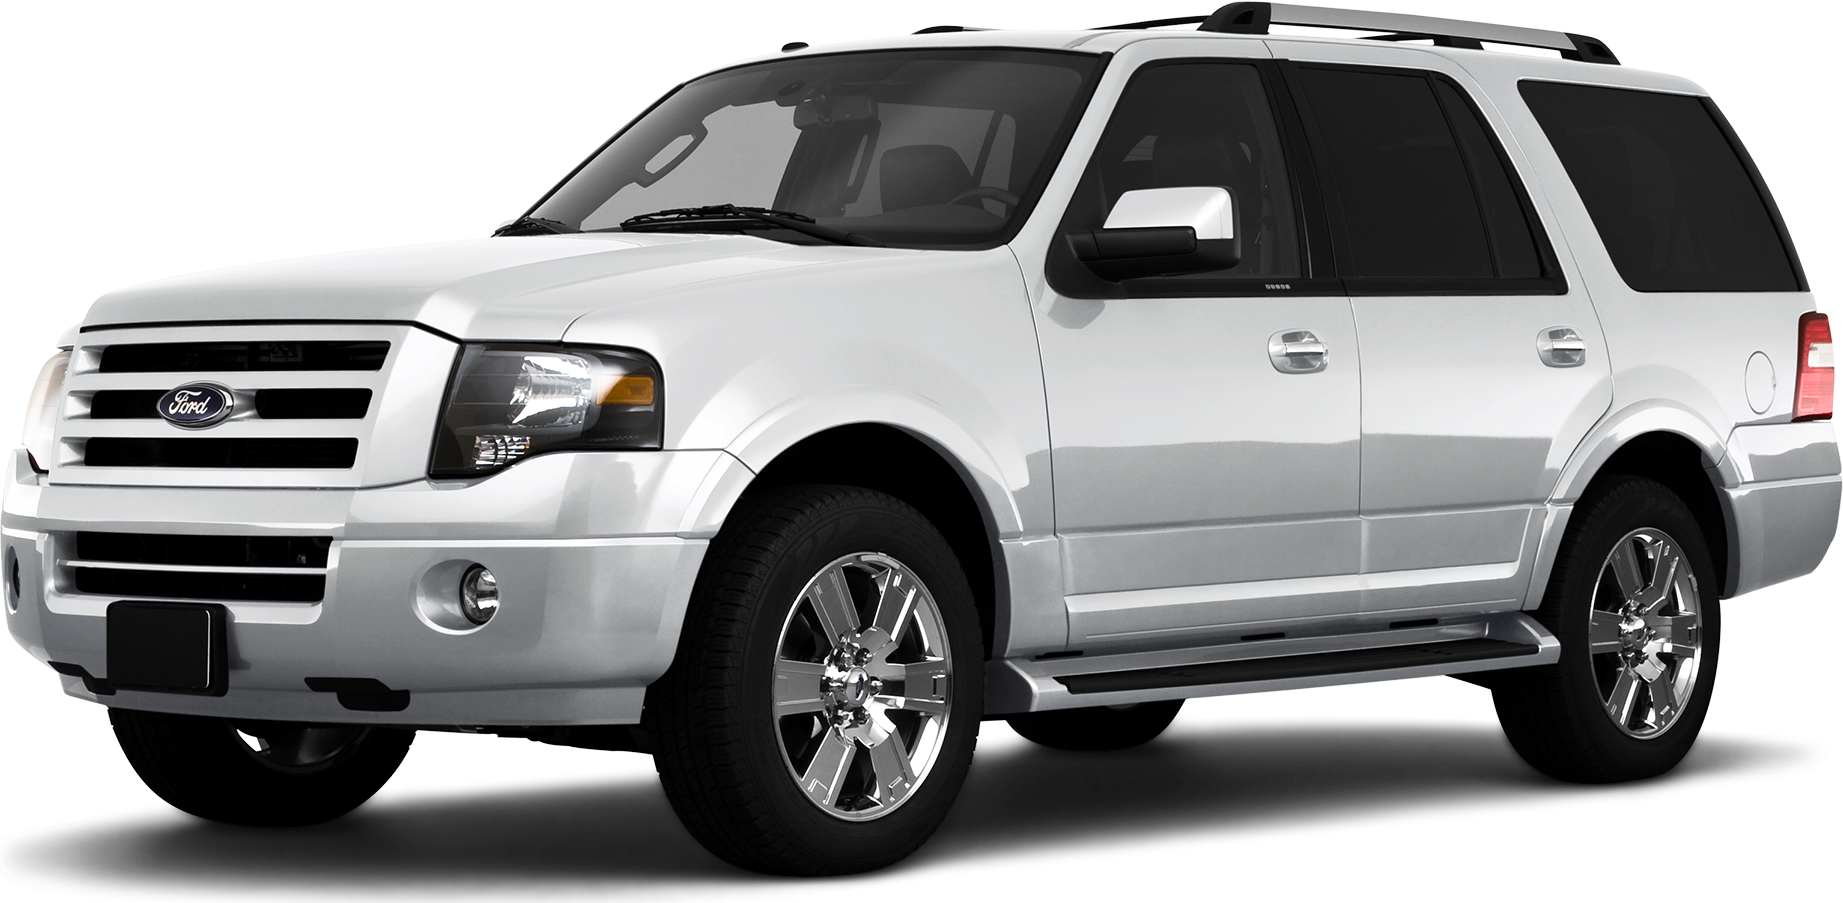 Used 2010 Ford Explorer Values Cars For Sale Kelley Blue Book